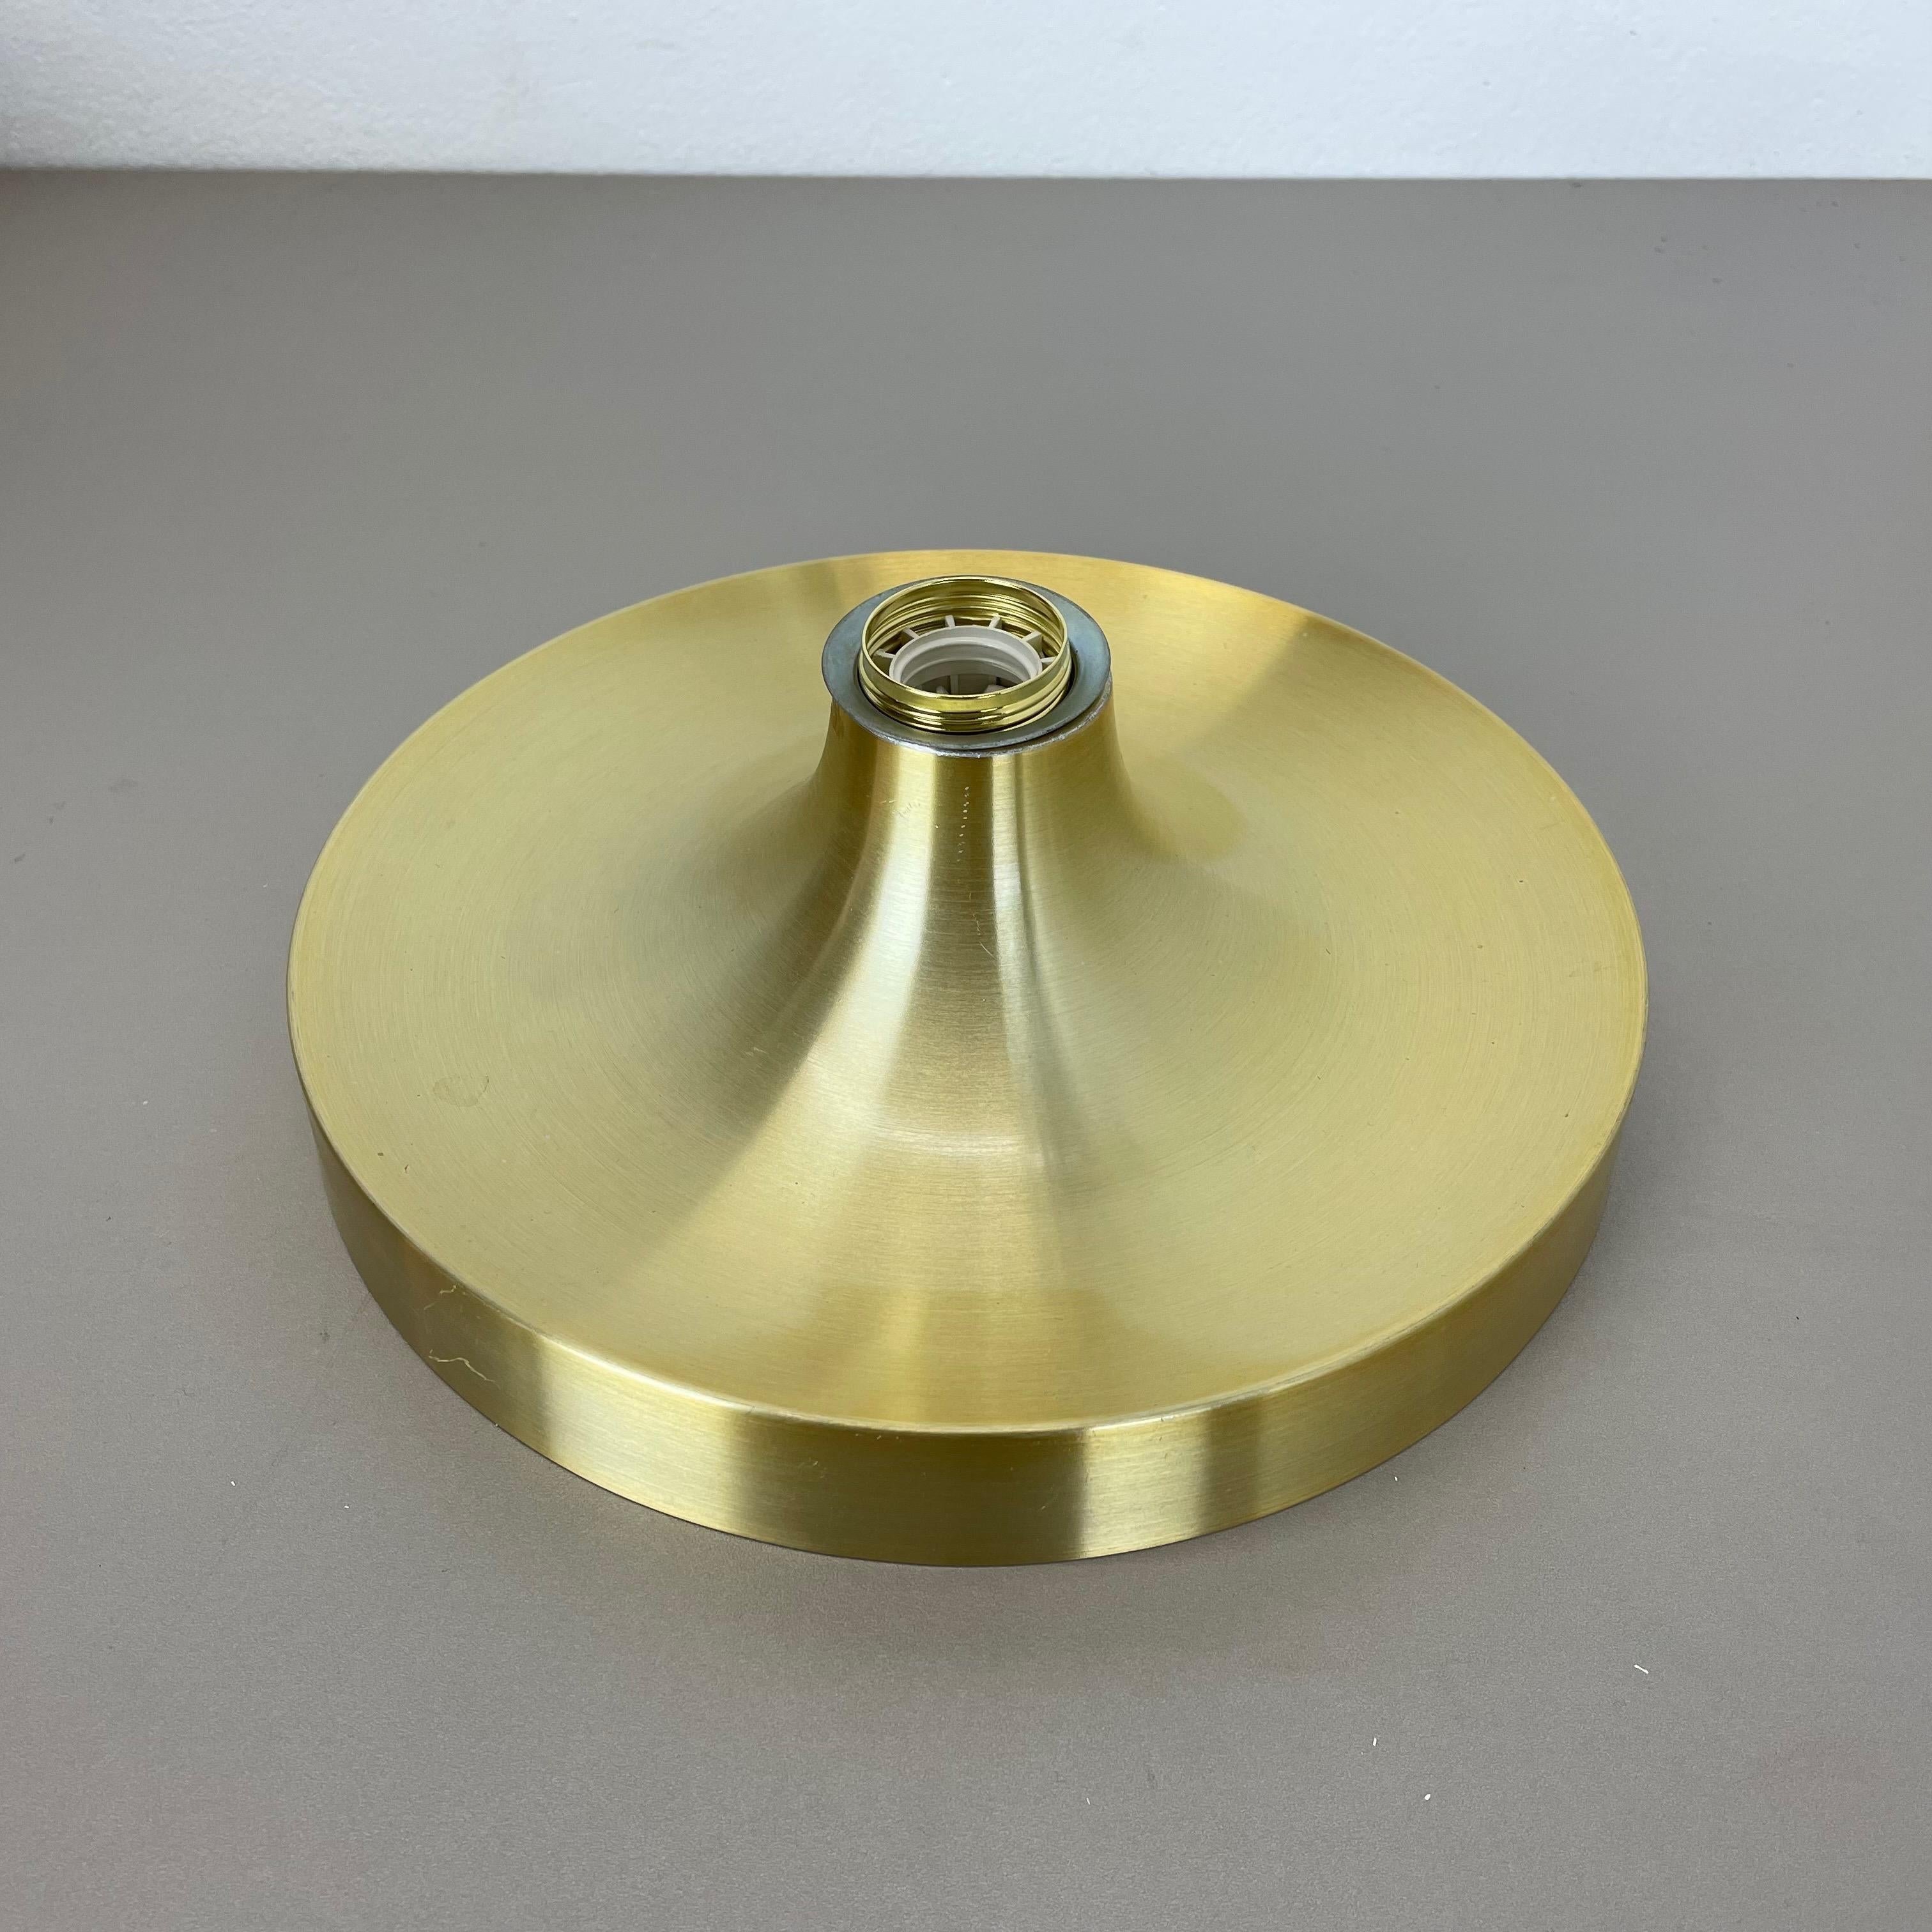 Metal Rare Golden Charlotte Perriand Disc Wall Light by Honsel, Germany 1960s For Sale